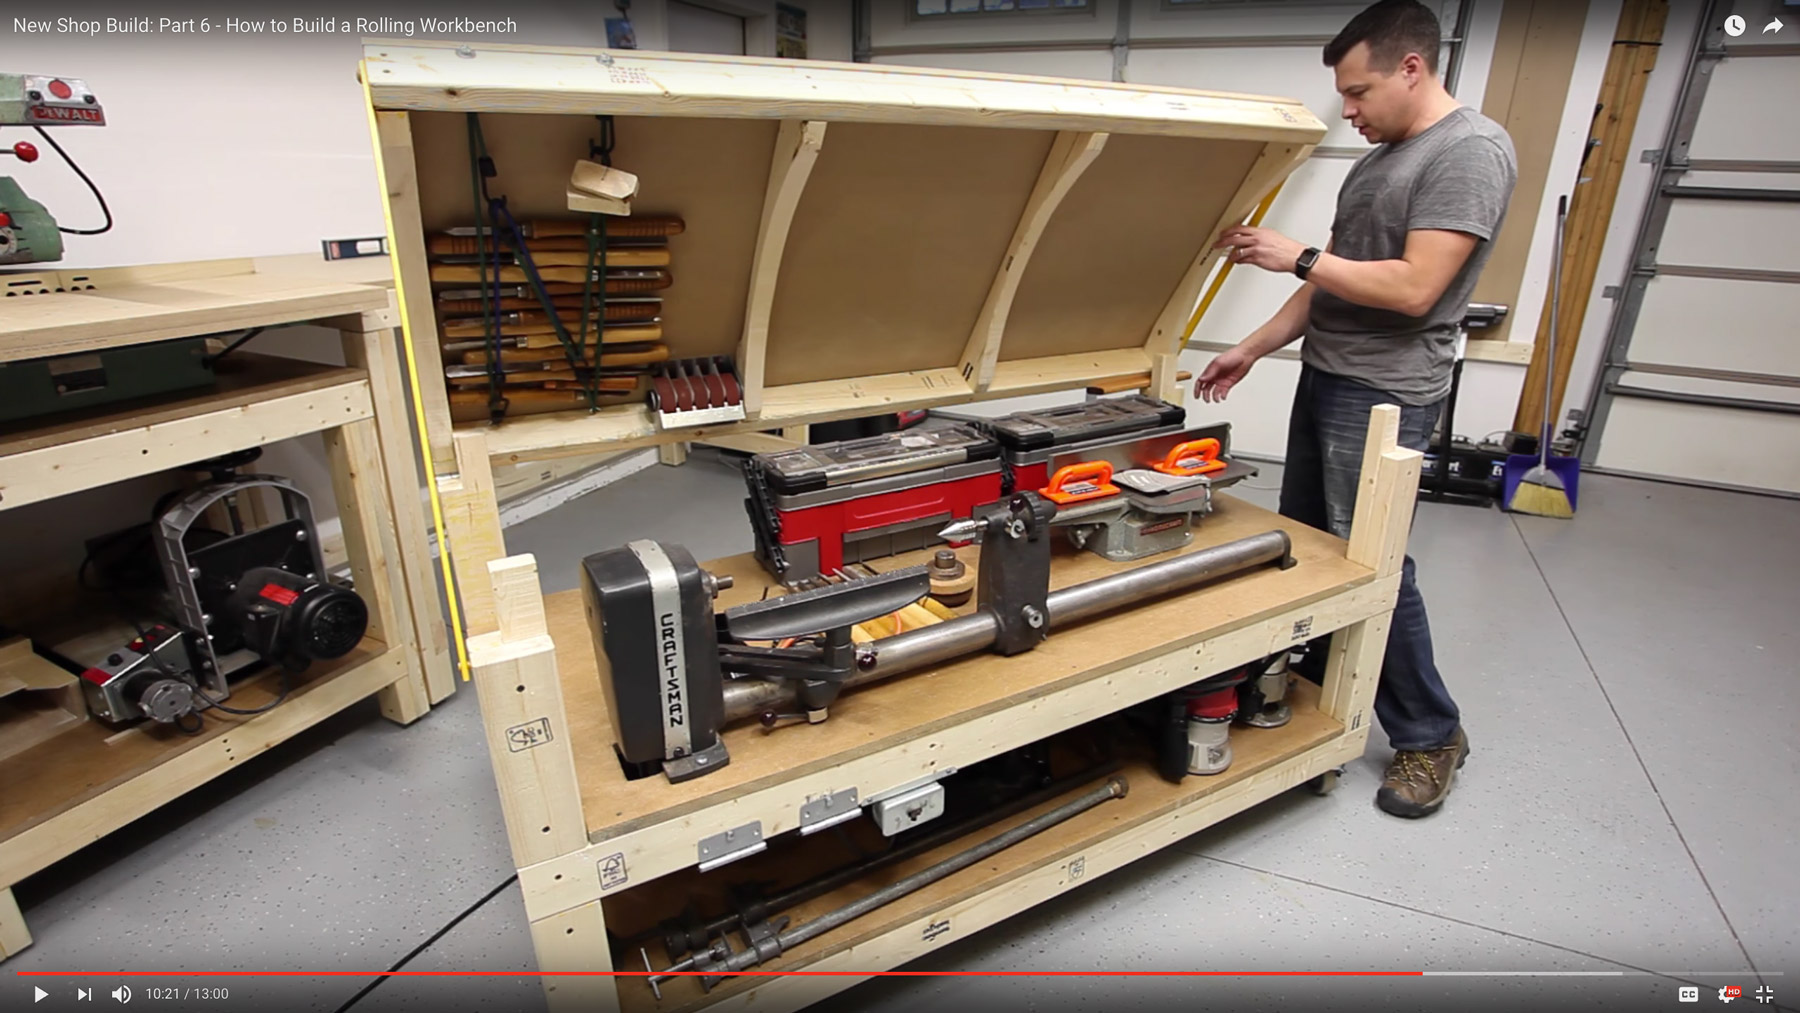 Workbench Plans - Tommy's Rolling Workbench and Miter Saw ...